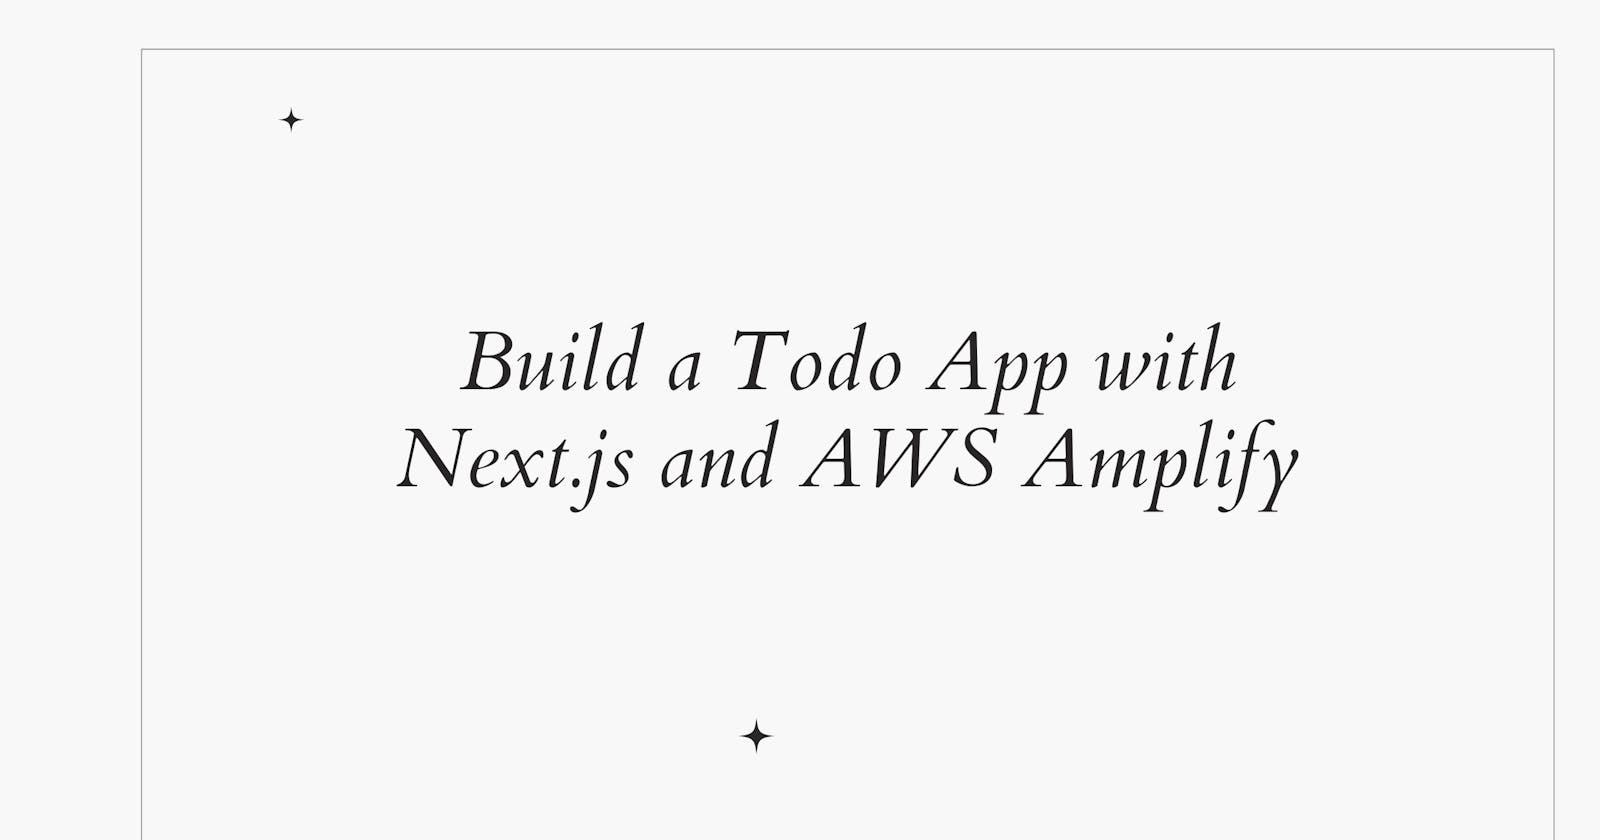 Build a Todo App with Next.js and AWS Amplify